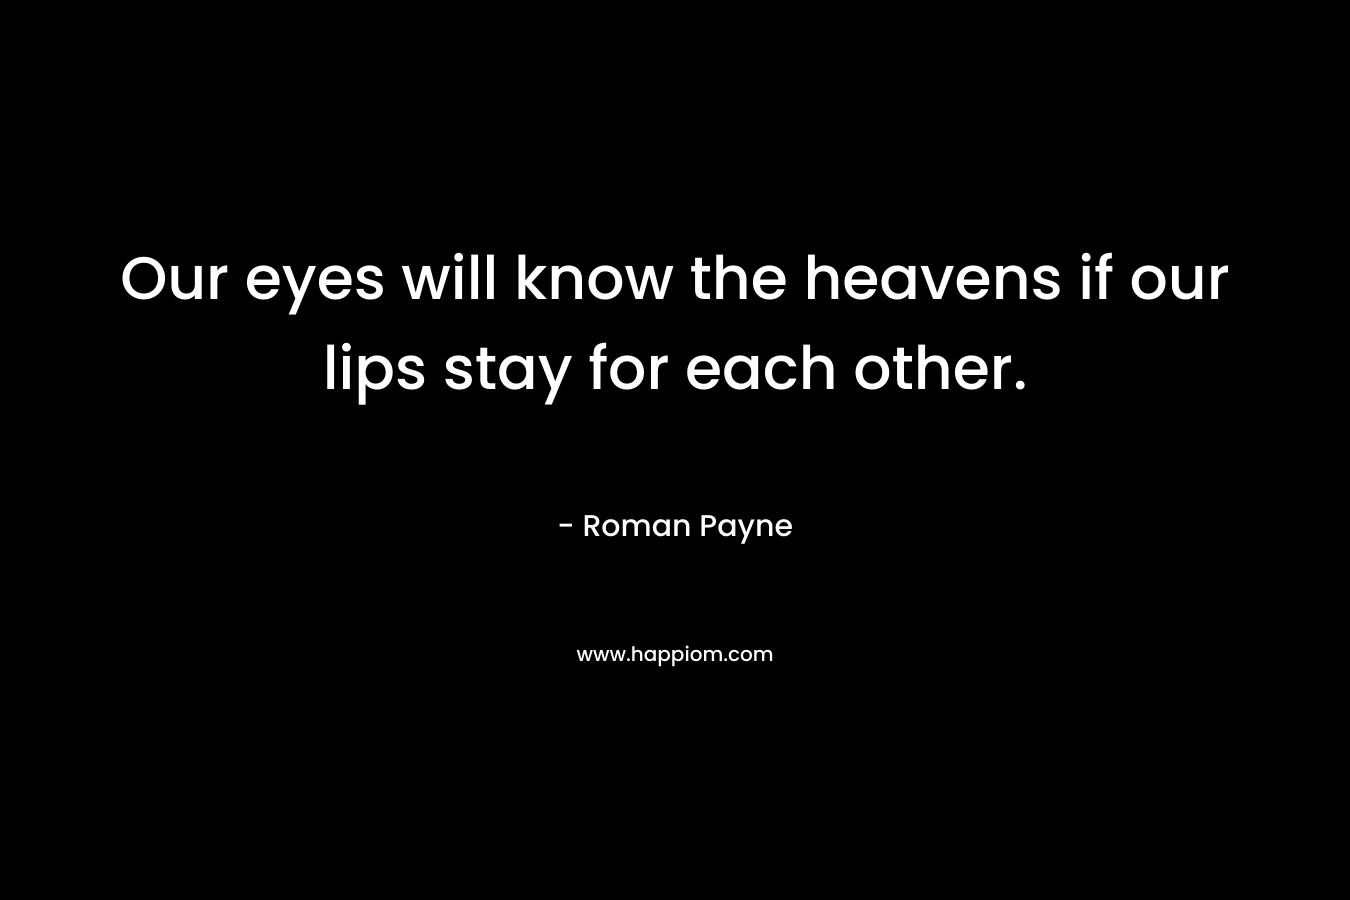 Our eyes will know the heavens if our lips stay for each other.